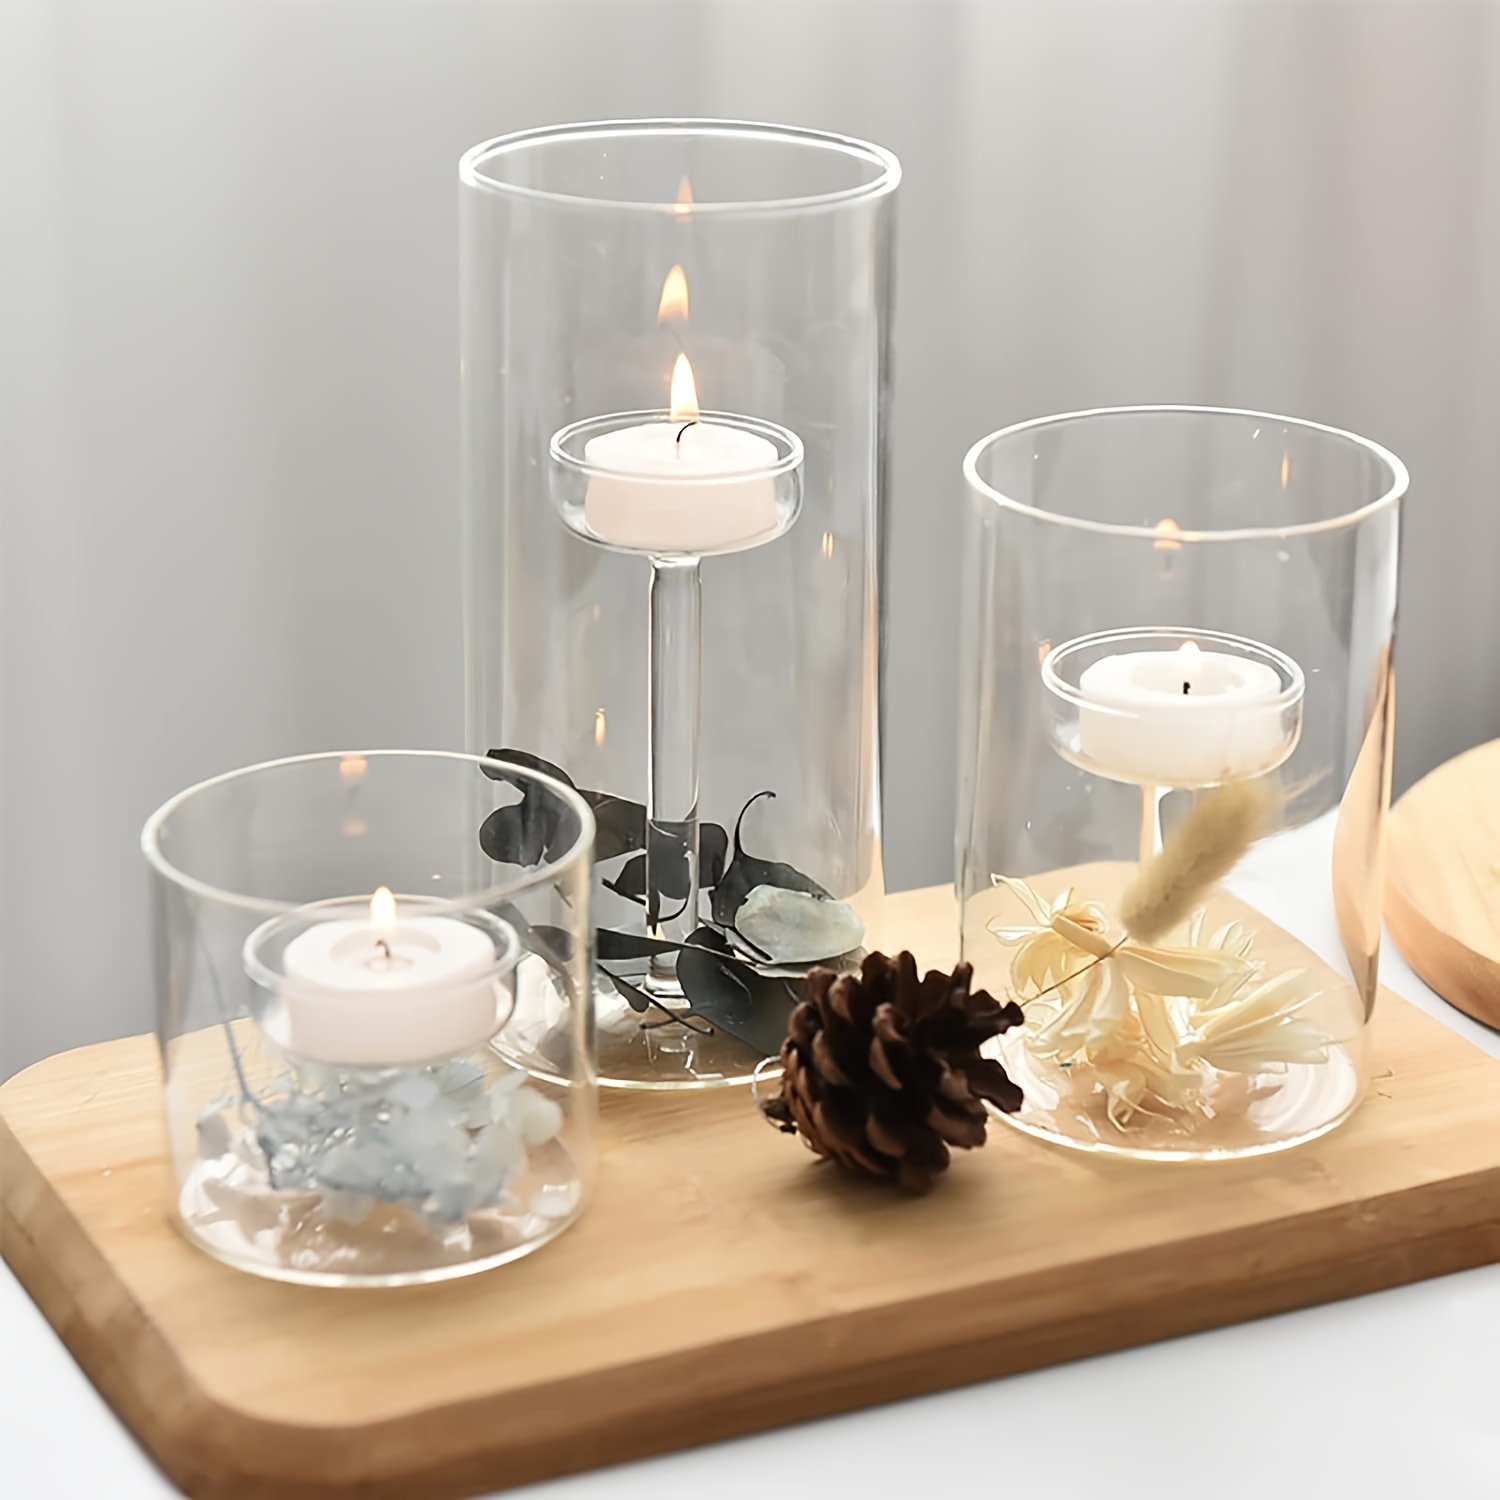 

3pcs Cylinder Glass Decorative Hurricane Candle Holder, Clear Votive Candle Holders Table Centerpieces For Dining Room Wedding Parties Home Decorations